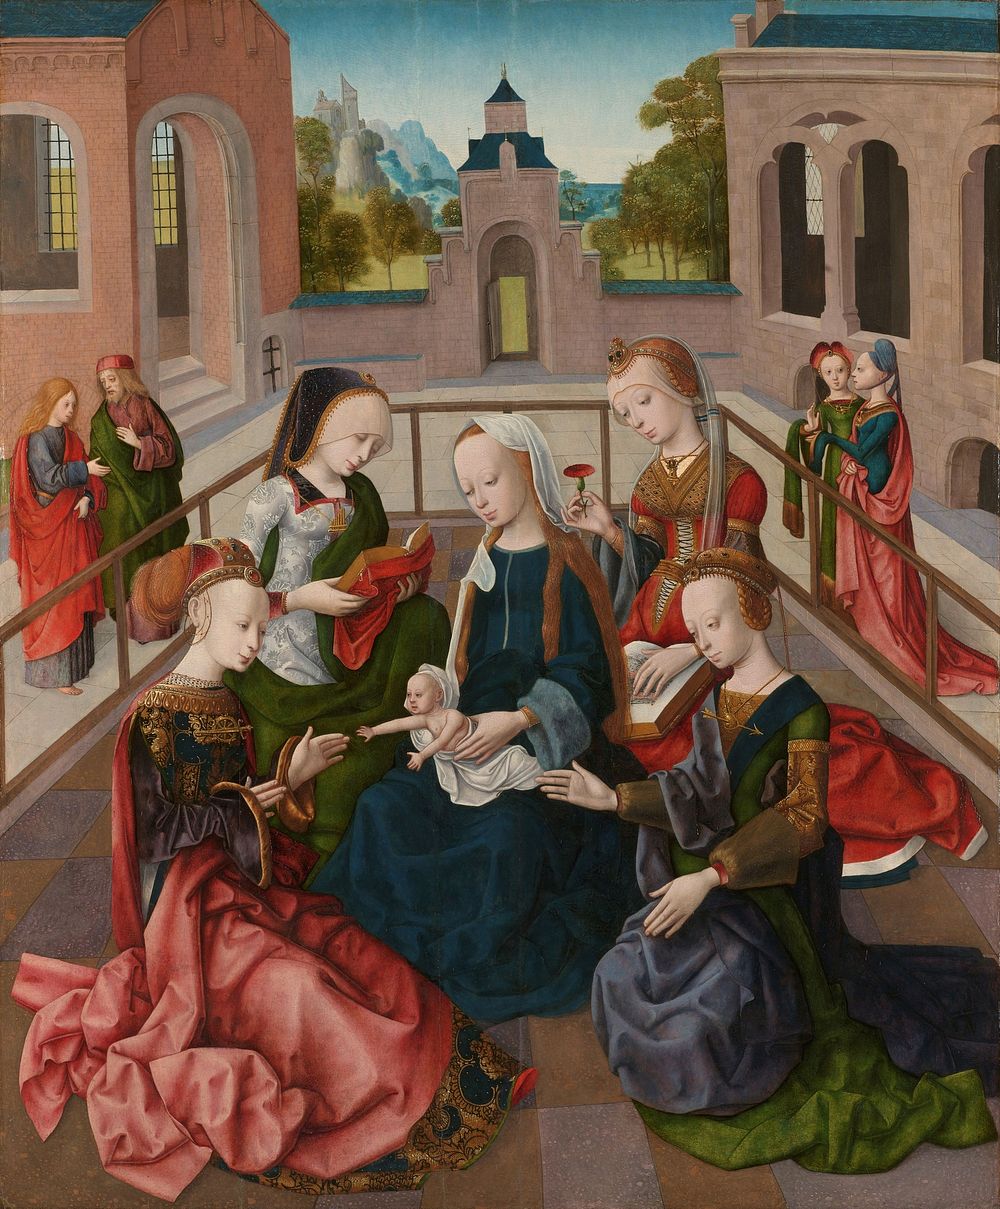 The Virgin and Child with Four Holy Virgins (c. 1495 - c. 1500) by Master of the Virgo inter Virgines